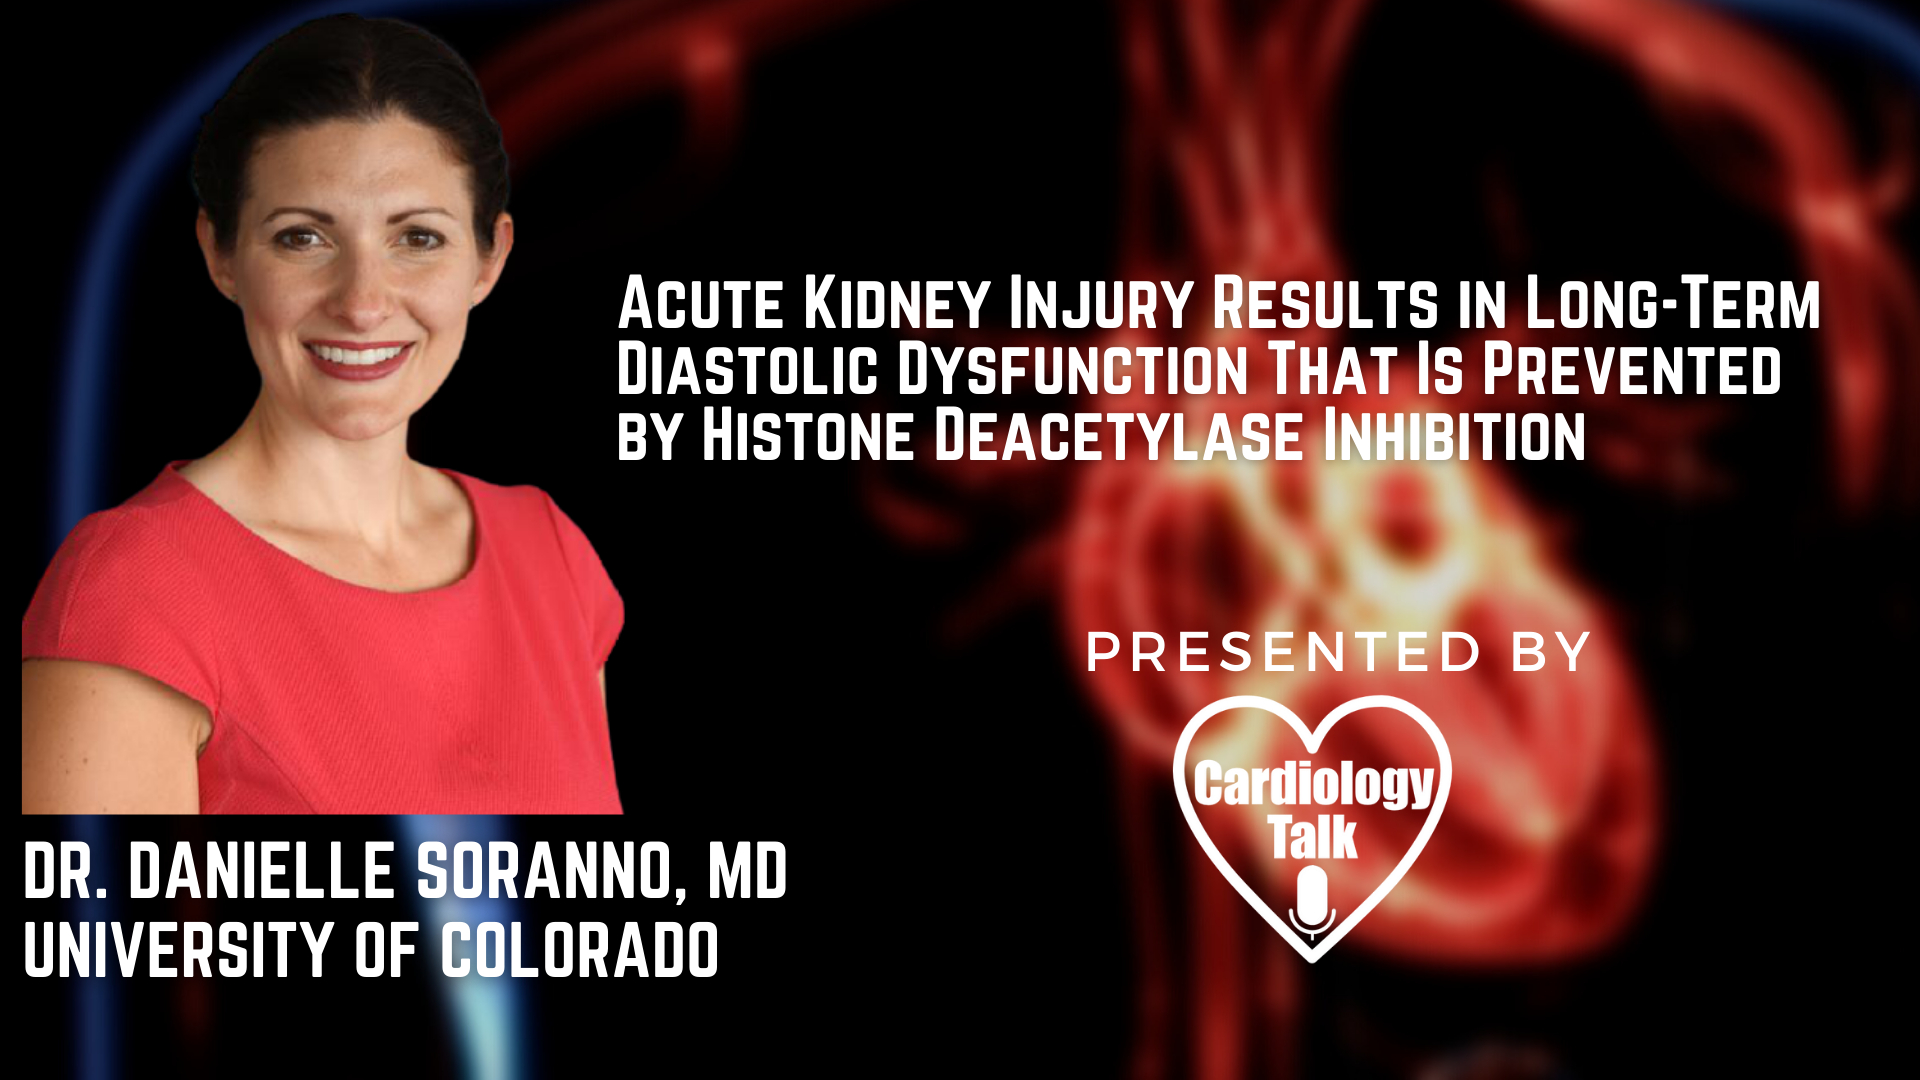 Dr. Danielle Soranno, MD- Acute Kidney Injury Results in Long-Term Diastolic Dysfunction That Is Prevented by Histone Deacetylase Inhibition